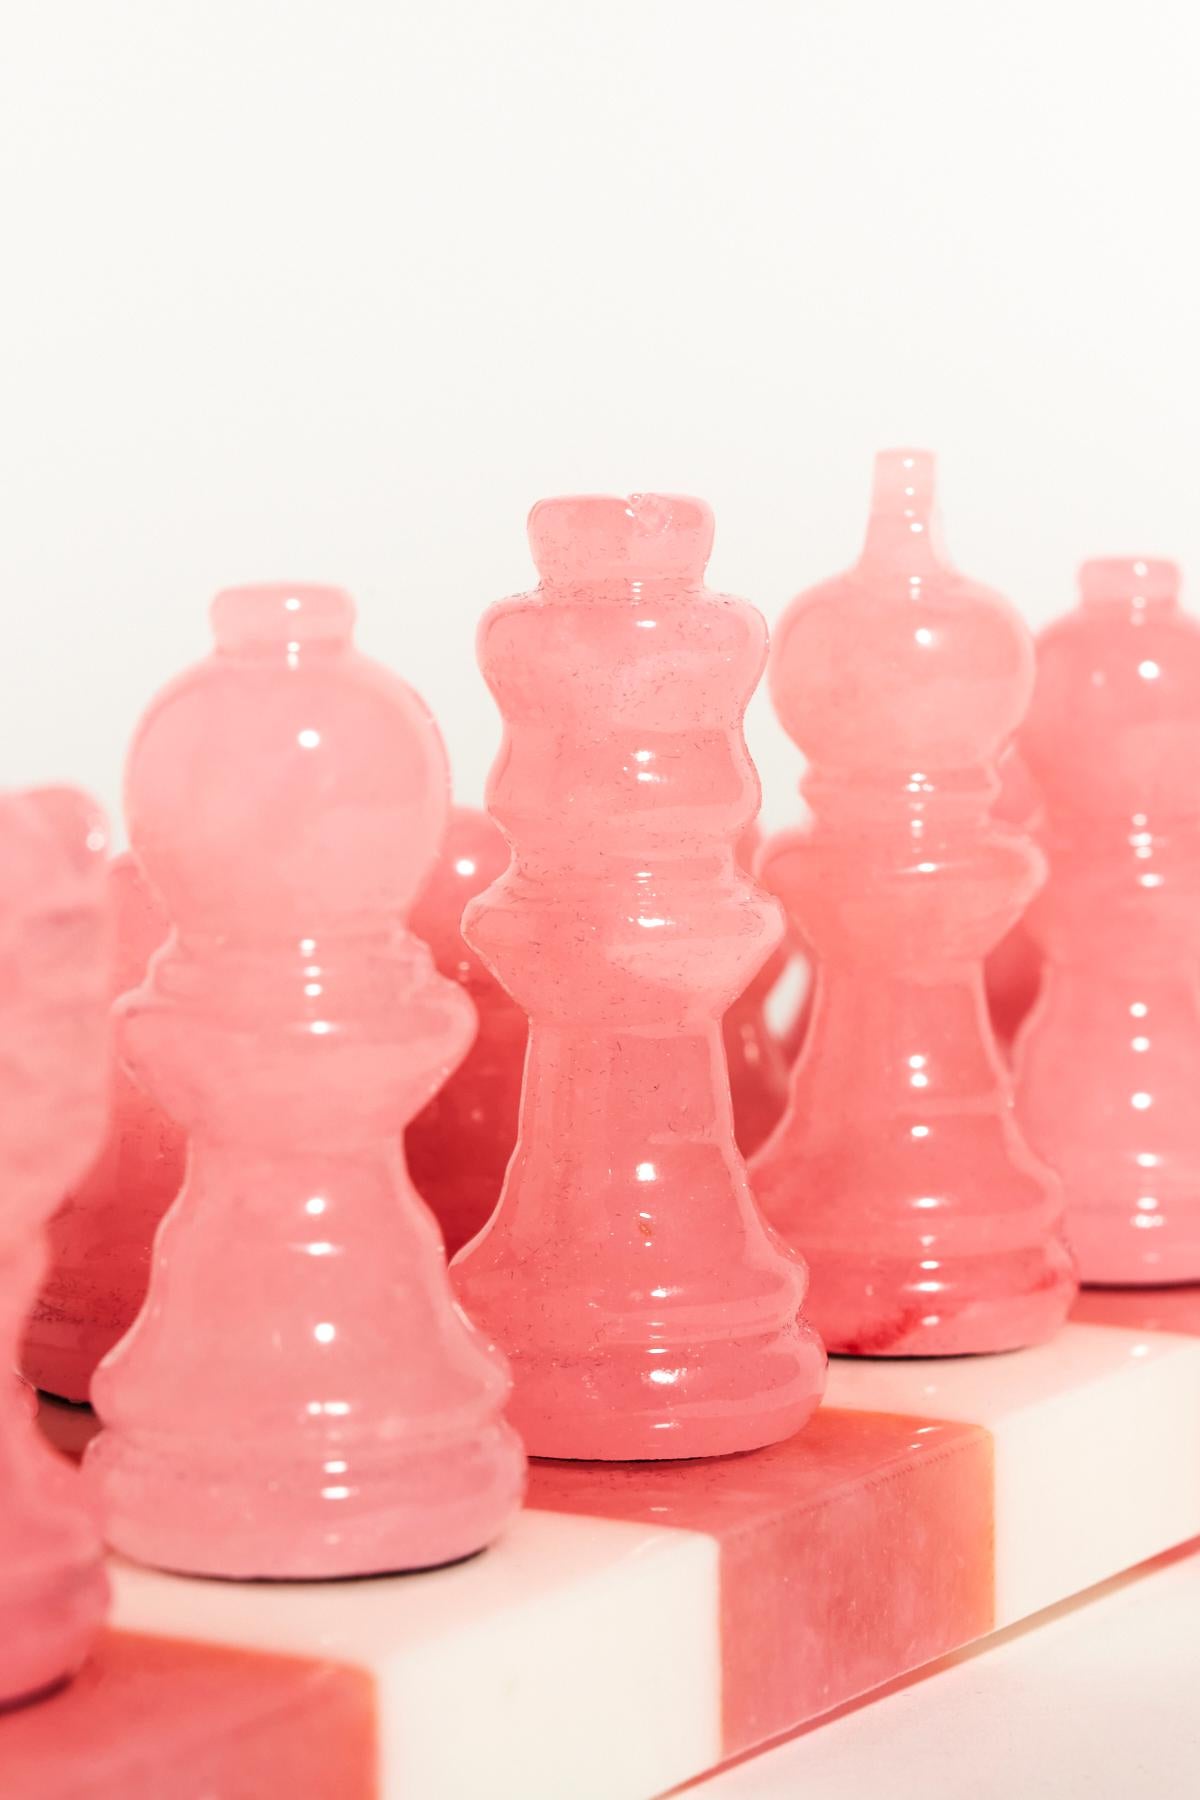 pink marble chess set